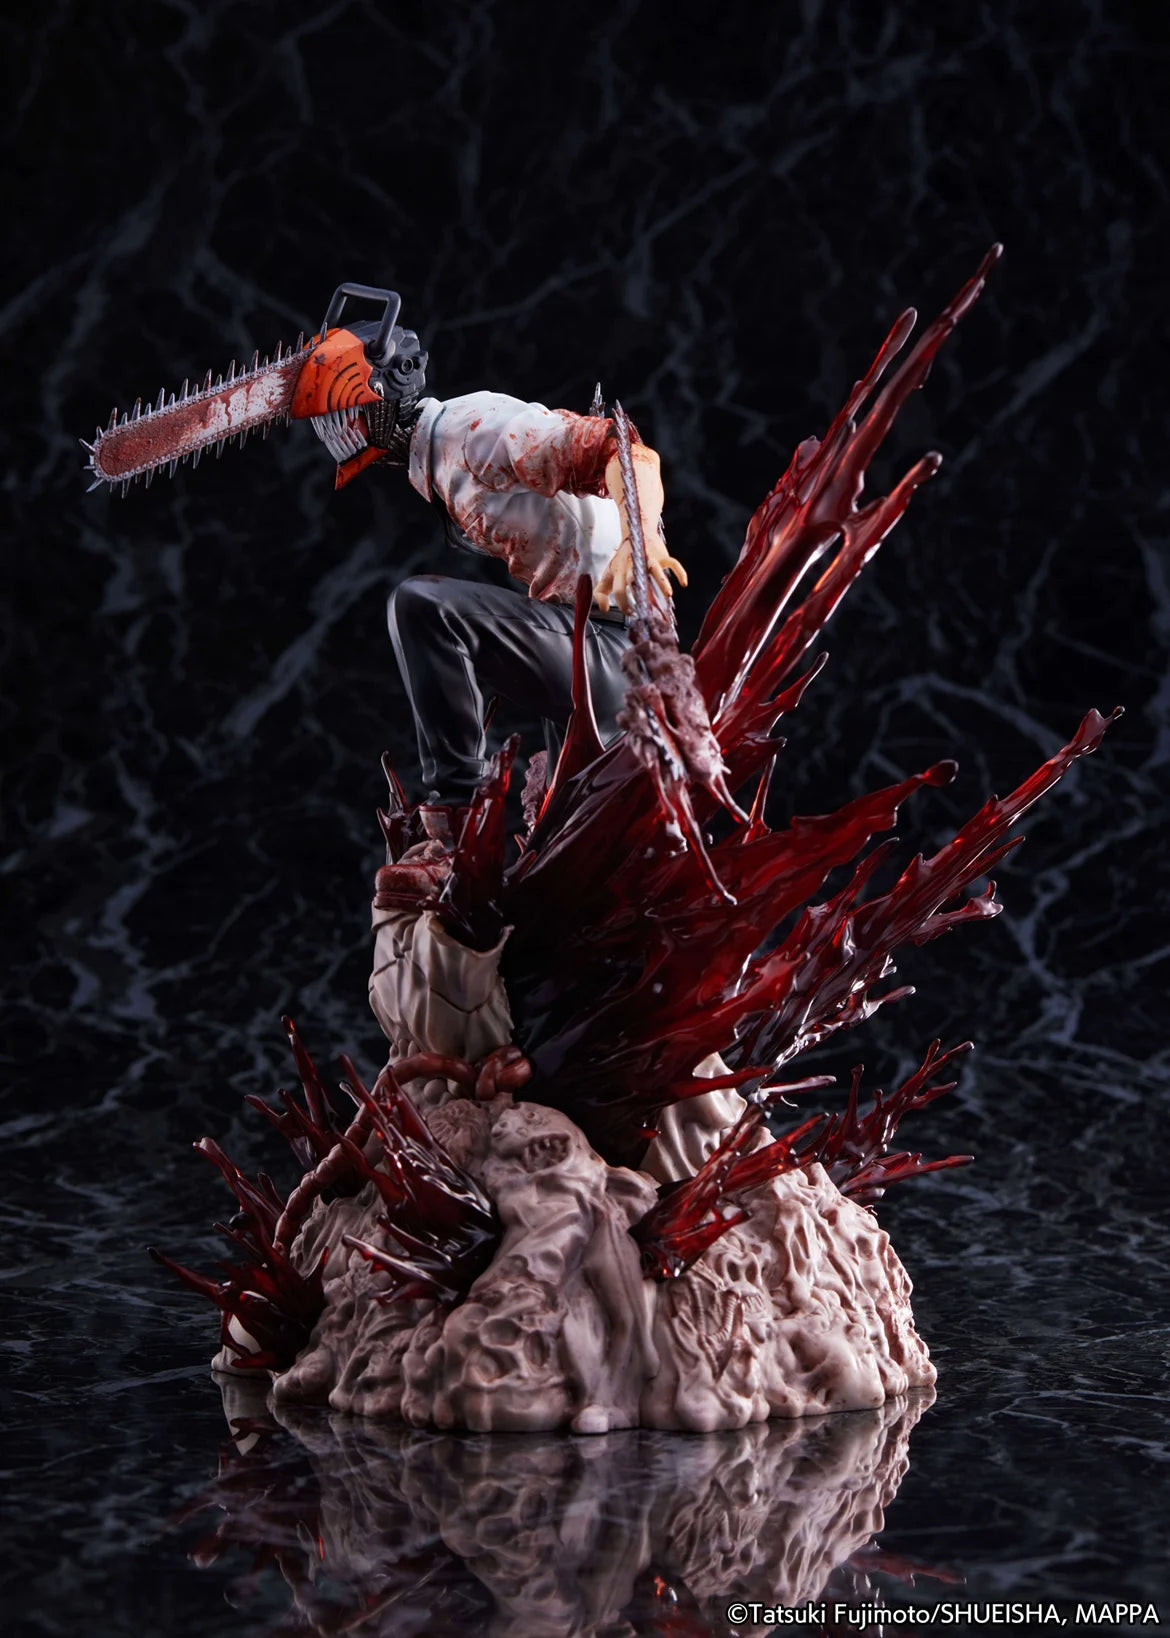 29cm Chainsaw Man Anime Figure Denji Action Figure Pvc Statue Chainsawman Figurine Model Collection Doll Decoration Toy Gift